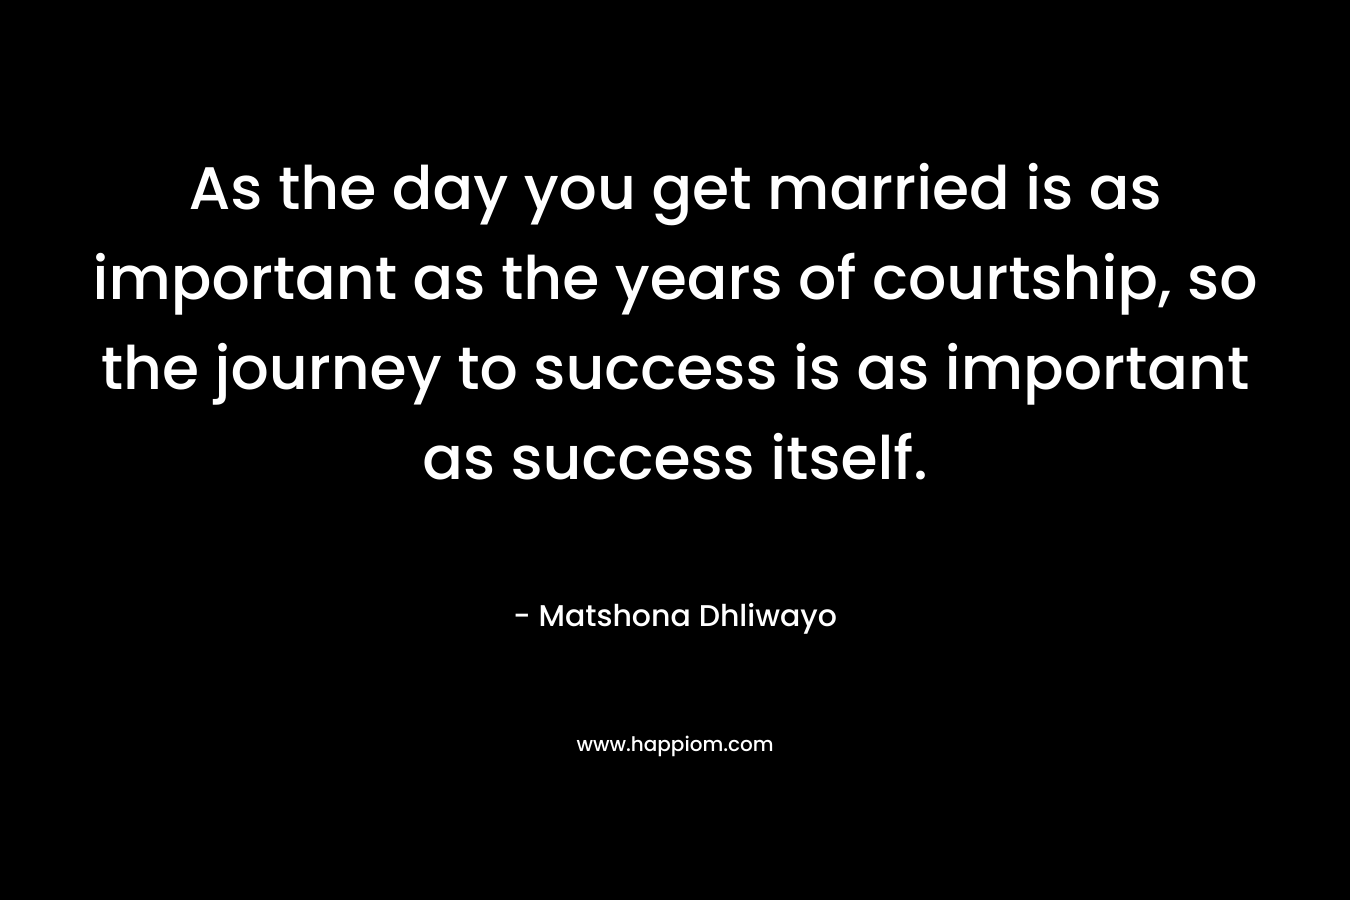 As the day you get married is as important as the years of courtship, so the journey to success is as important as success itself.